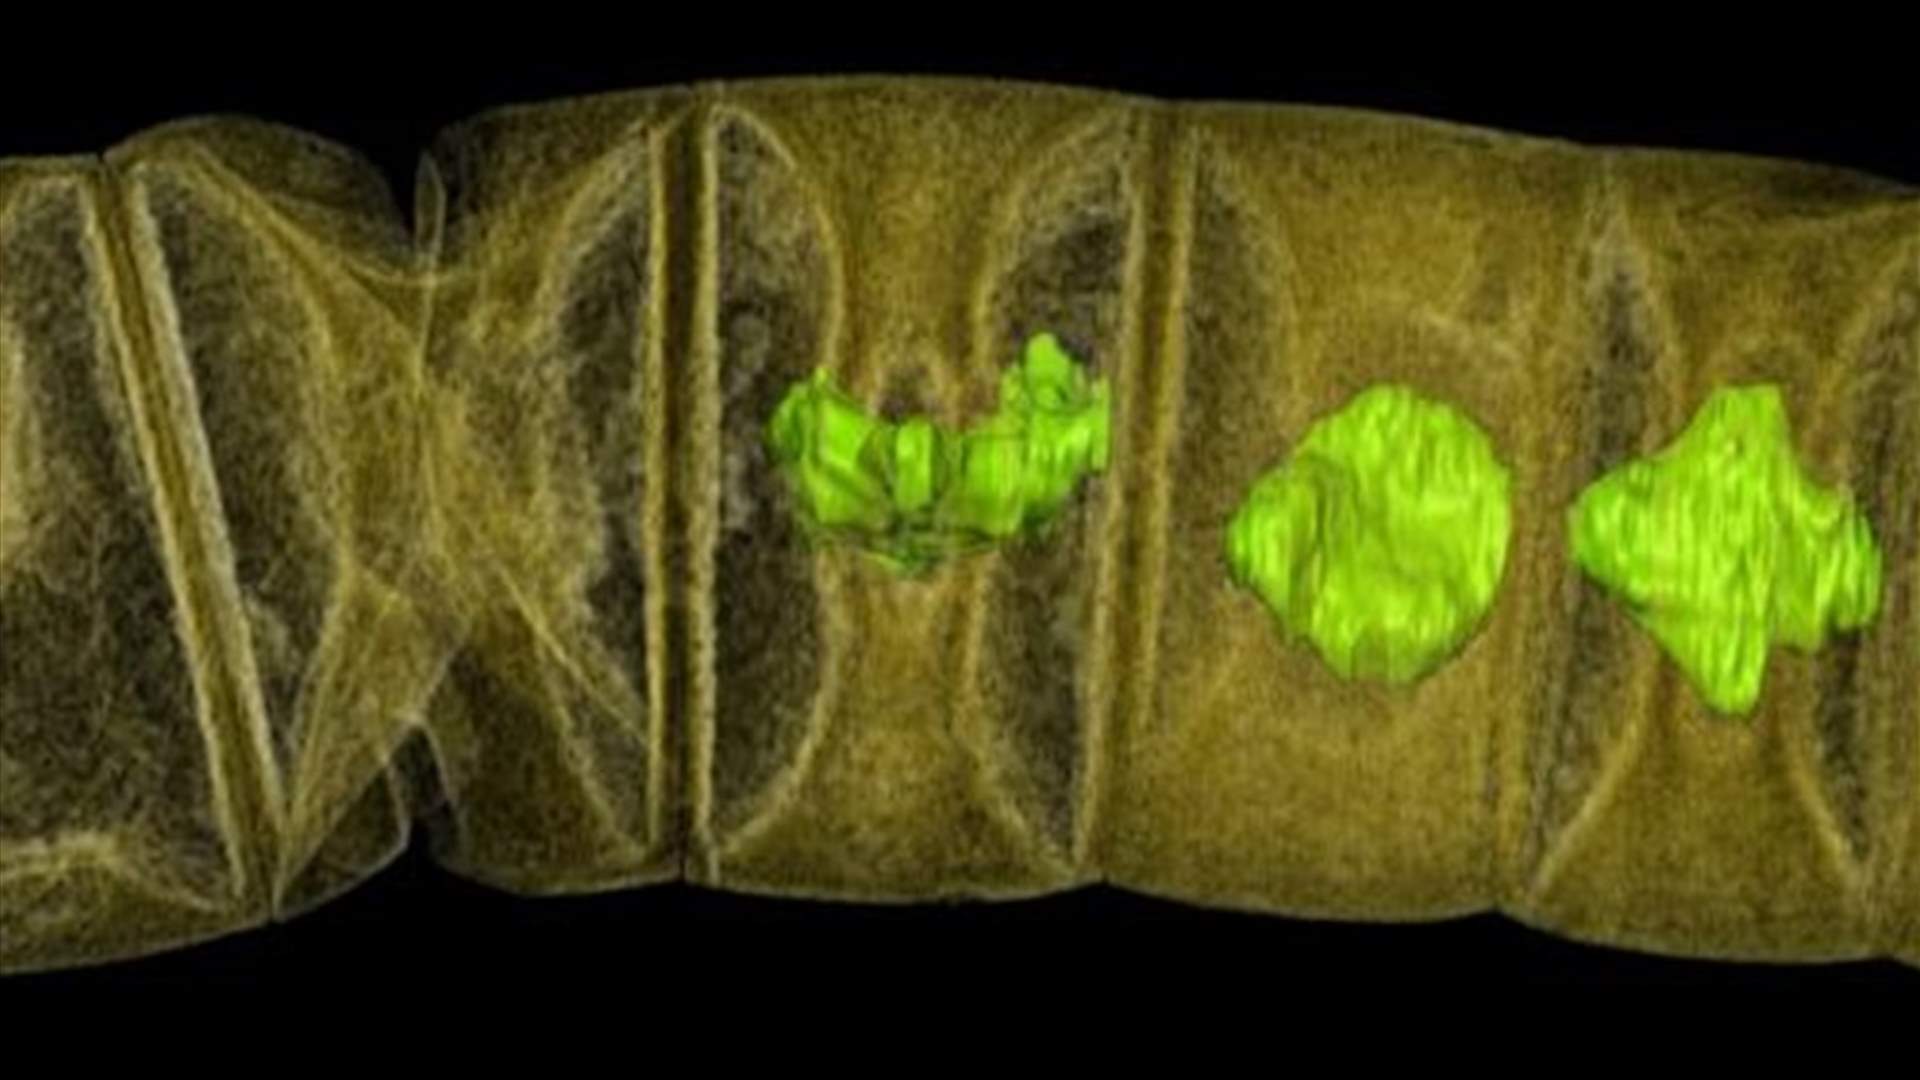 Fossils From 1.6 Billion Years Ago May Be Oldest-Known Plants